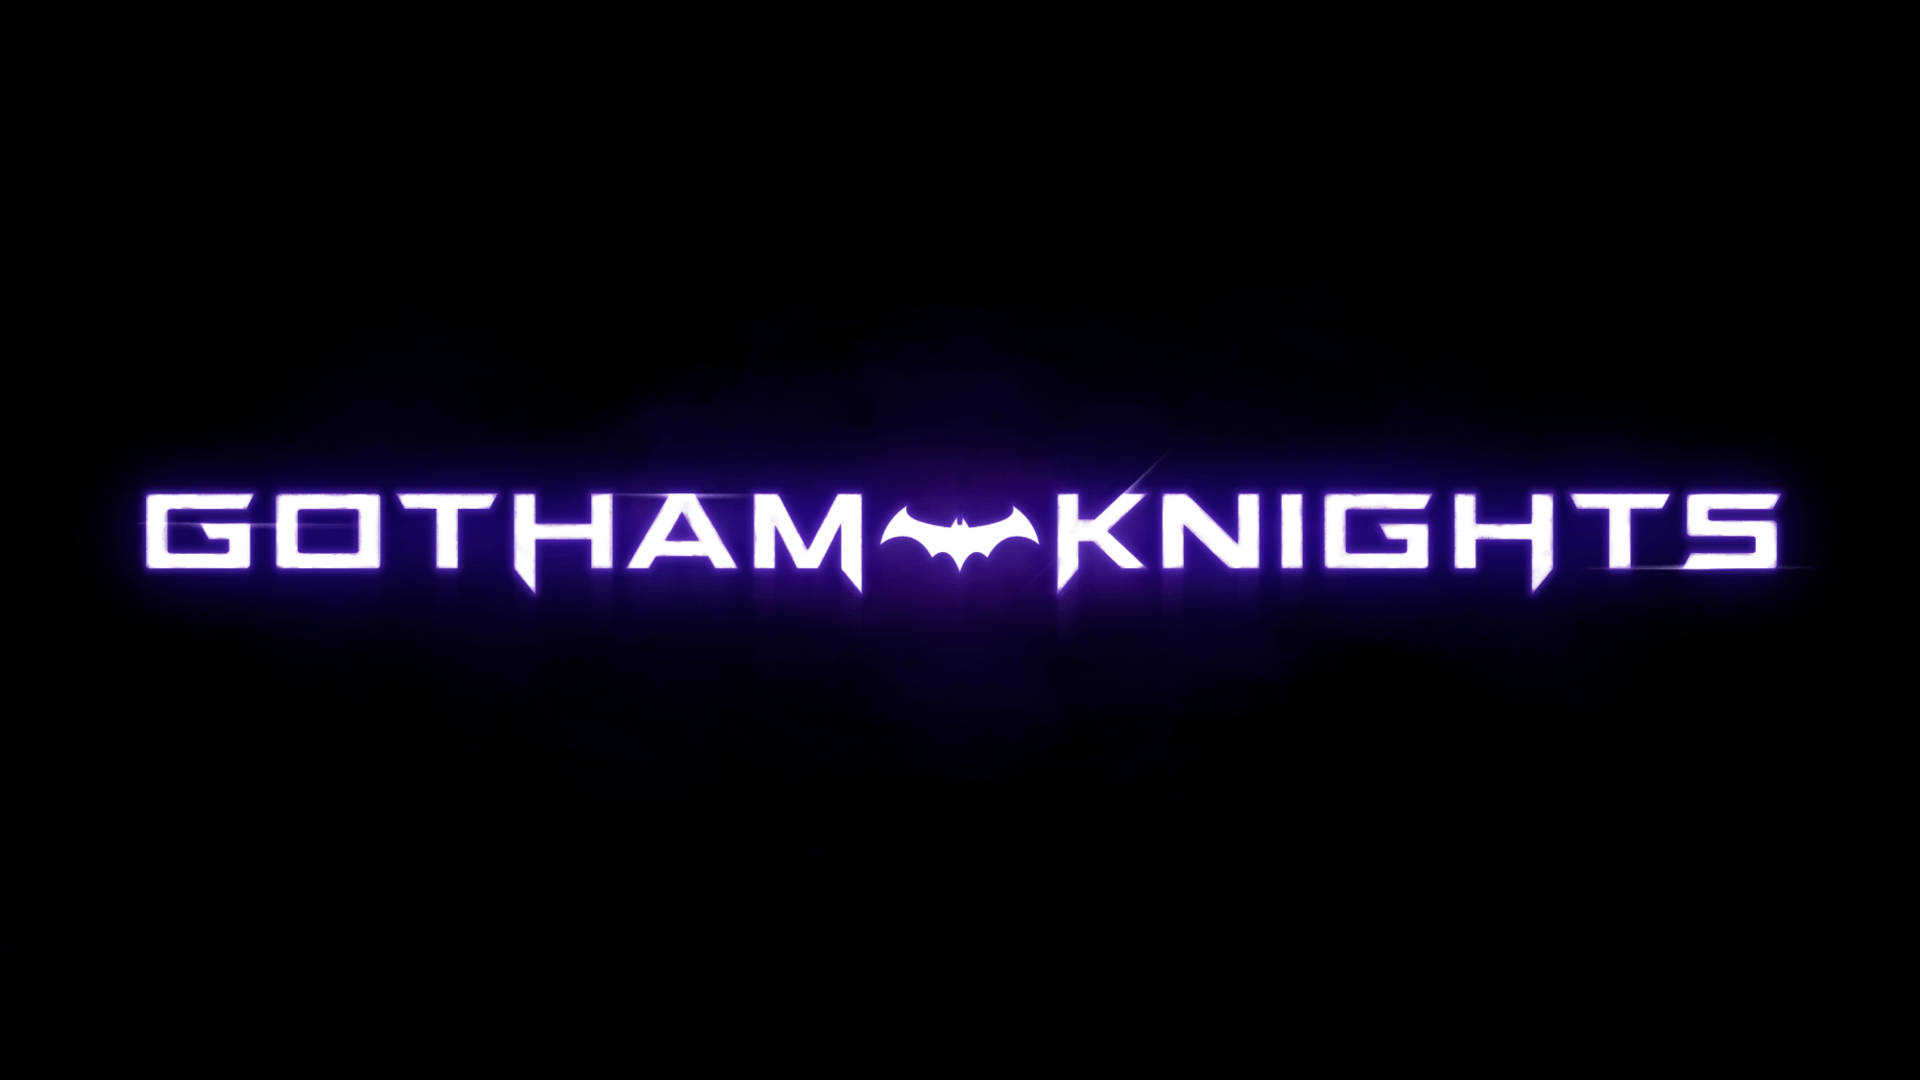 download ps5 gotham knights for free